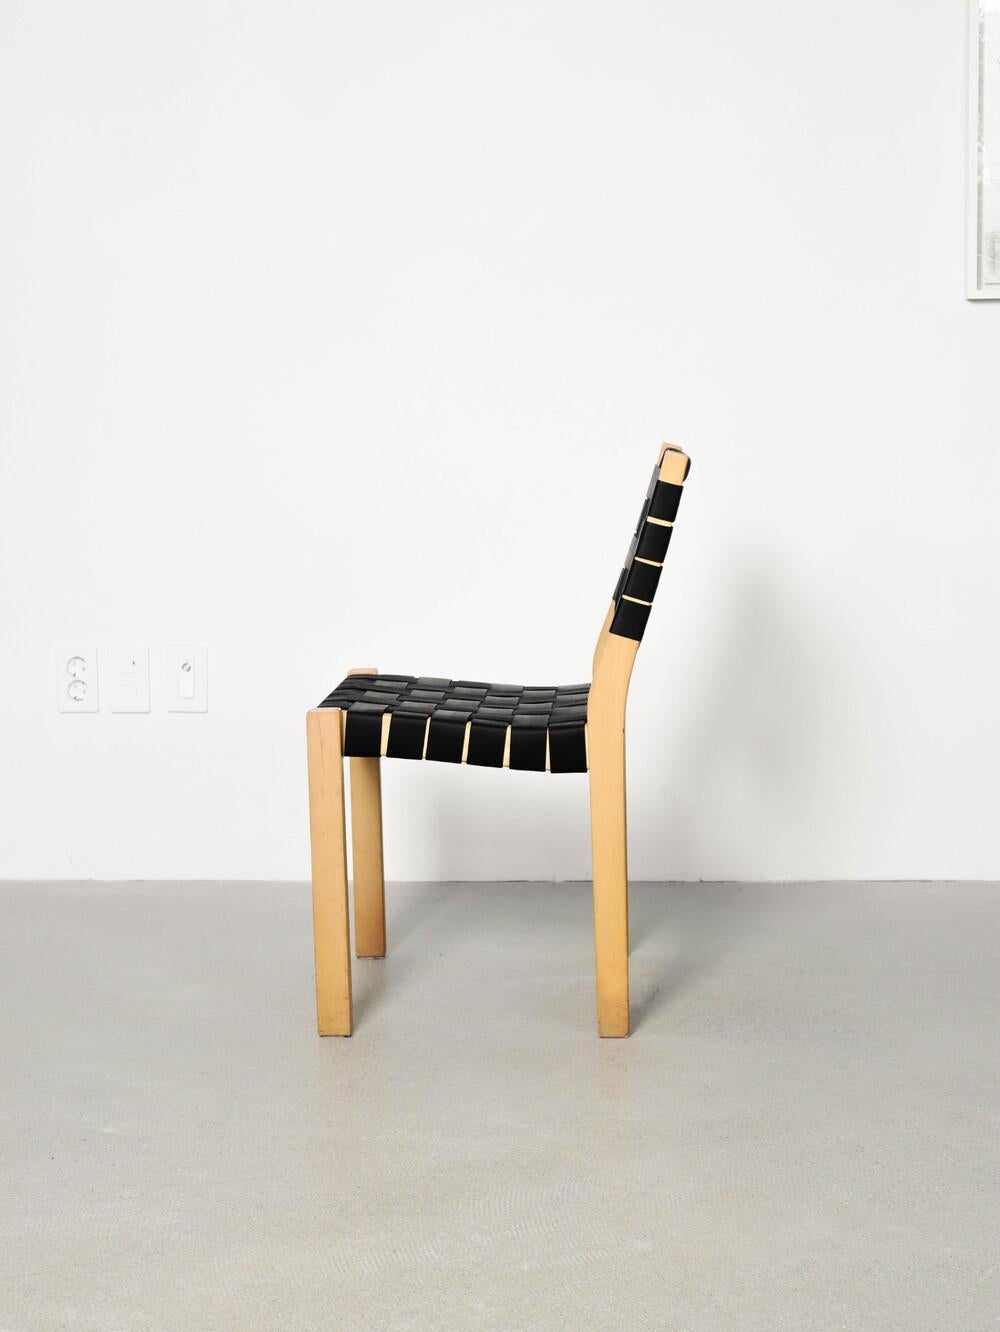 Chair 611 by Alvar Aalto for Artek,
webbing has been newly done.  